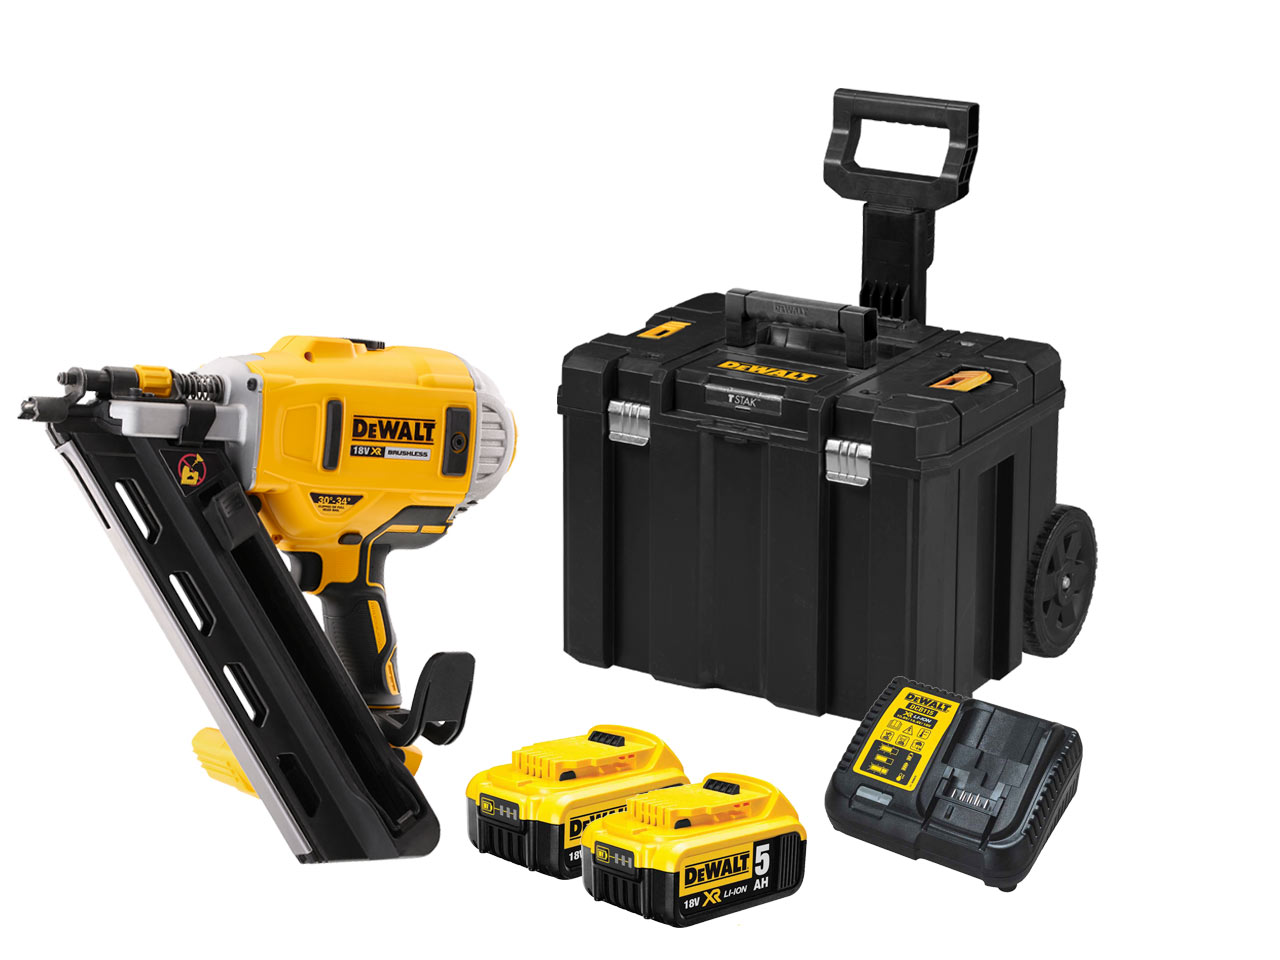 dewalt 2nd fix nail gun | 22 All Sections Ads For Sale in Ireland | DoneDeal